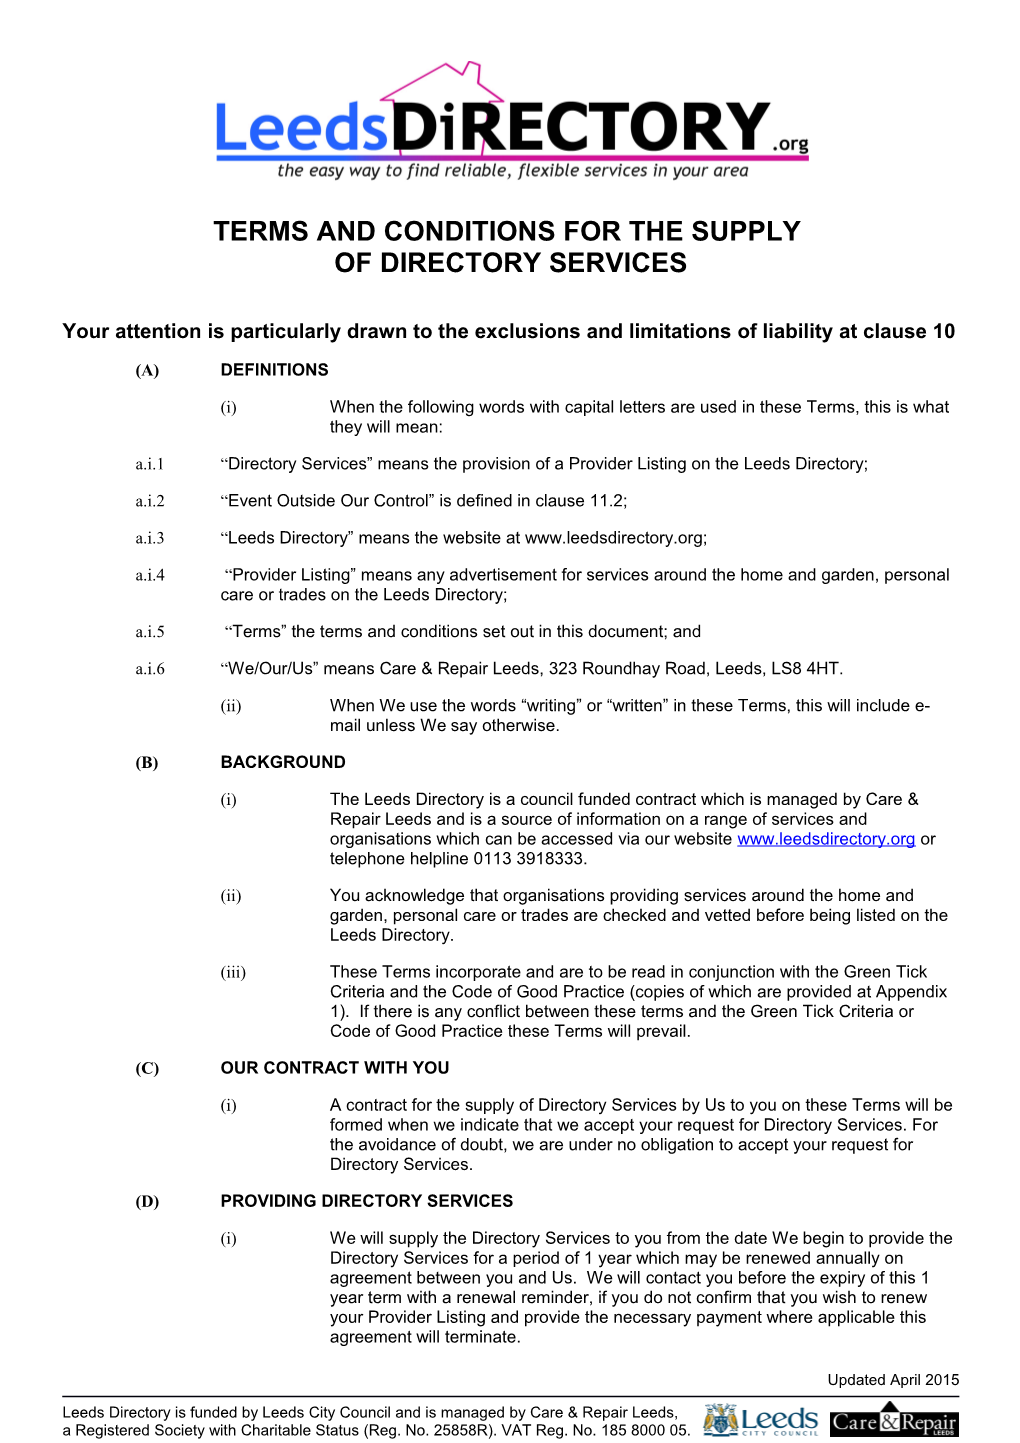 Terms and Conditions for the Supply of Directory Services